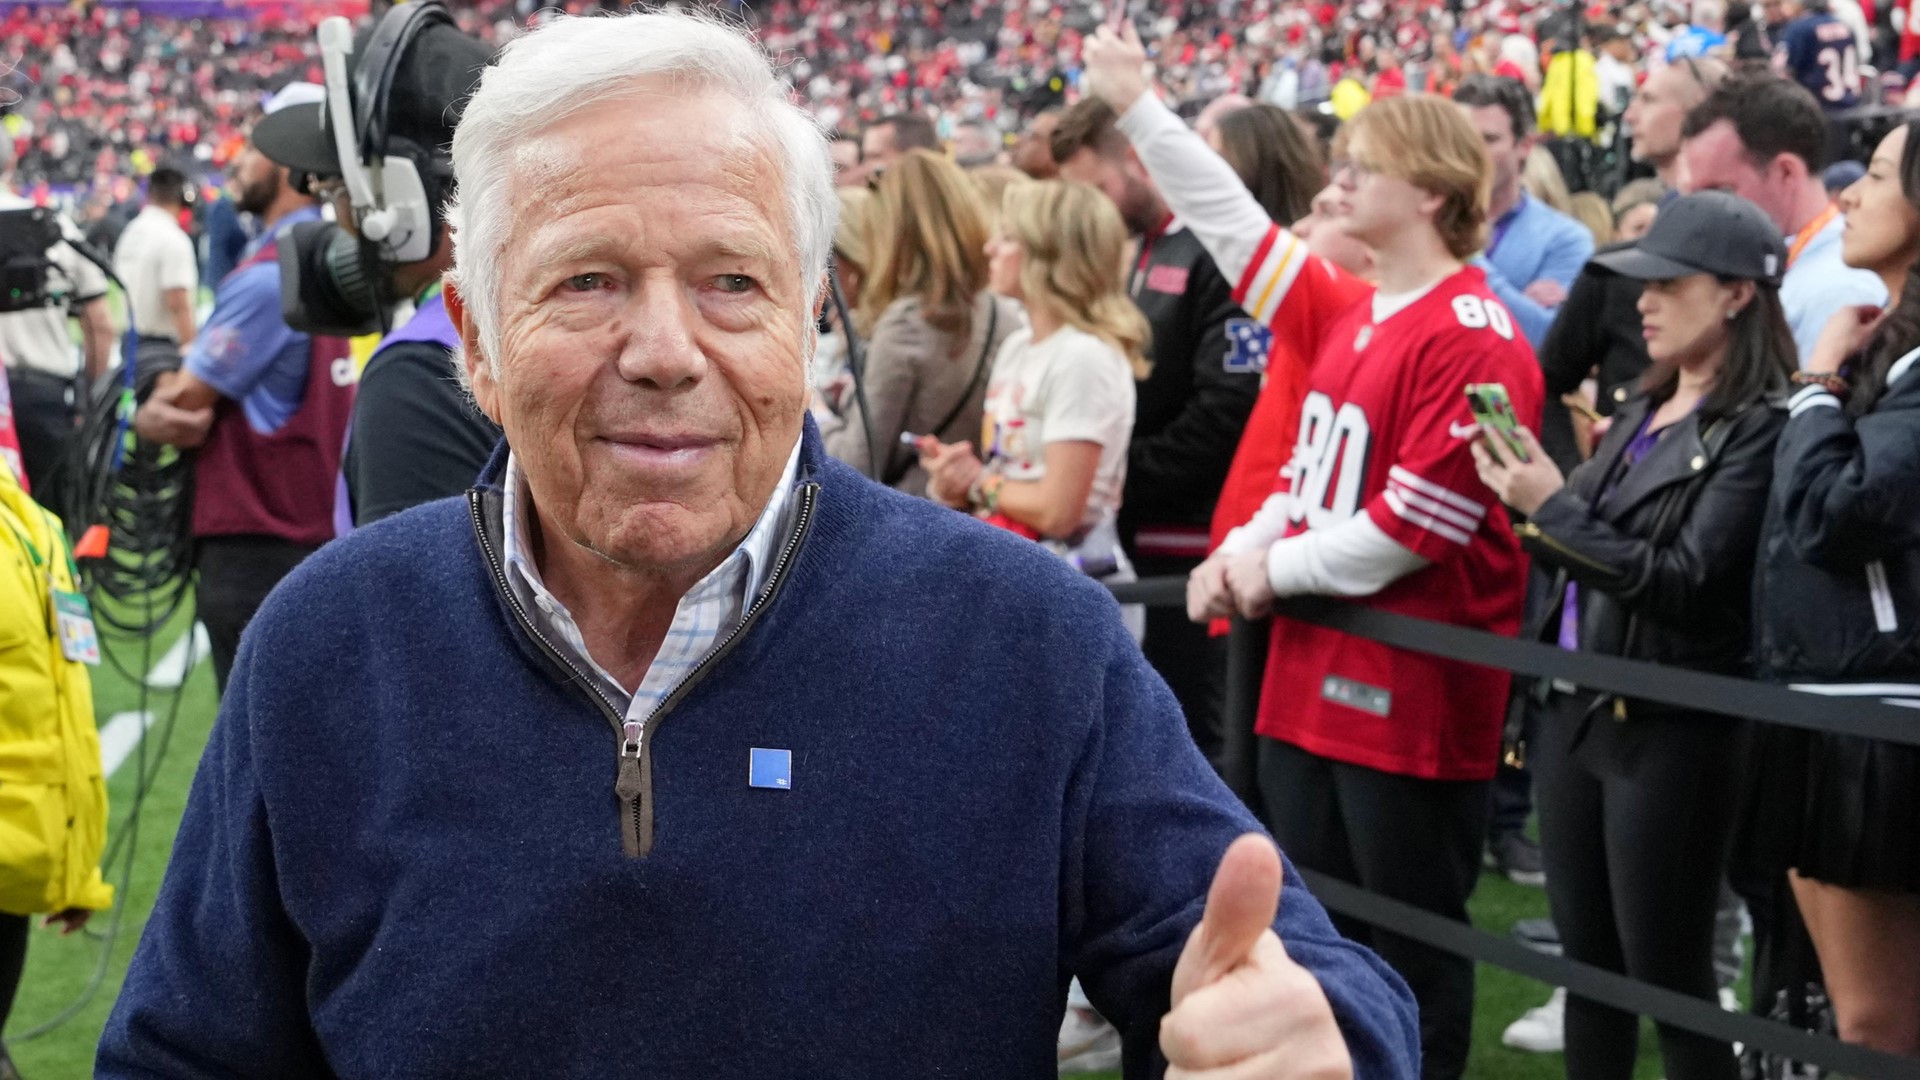 Robert Kraft ‘Disappointed’ About Negativity In Patriots
Docuseries